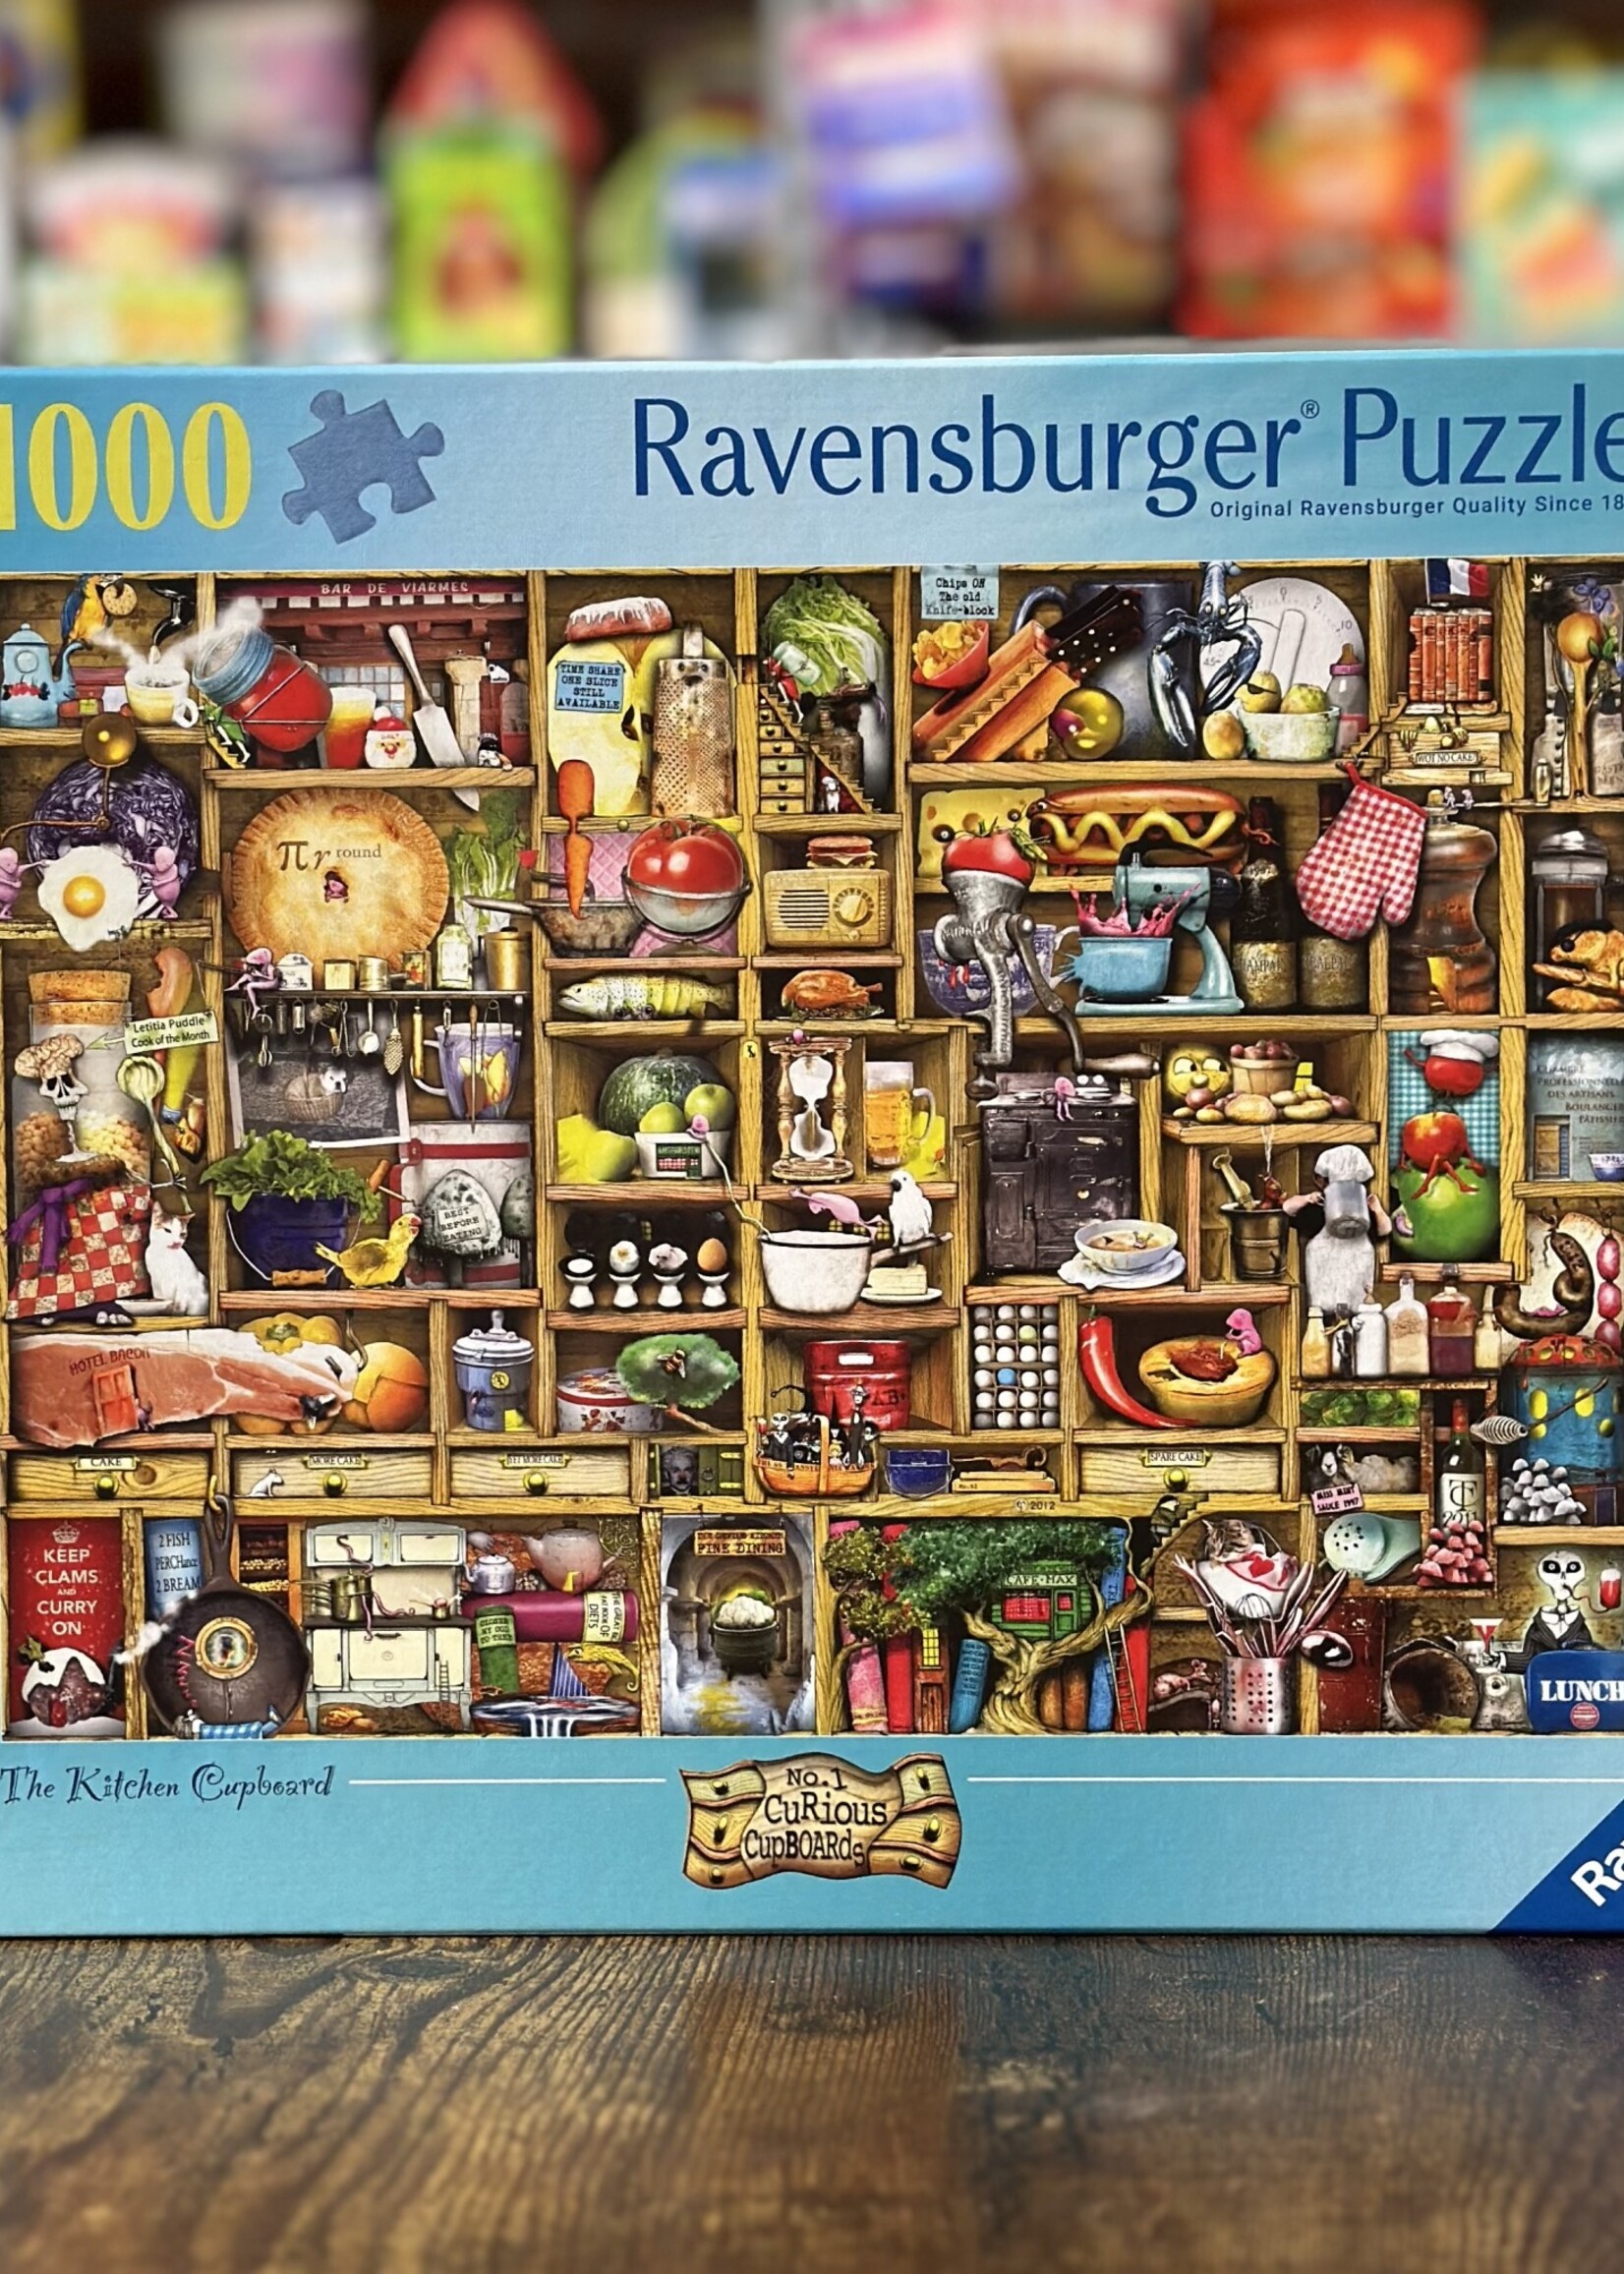 Ravensburger Puzzle - The Kitchen Cupboard 1000 Pc.